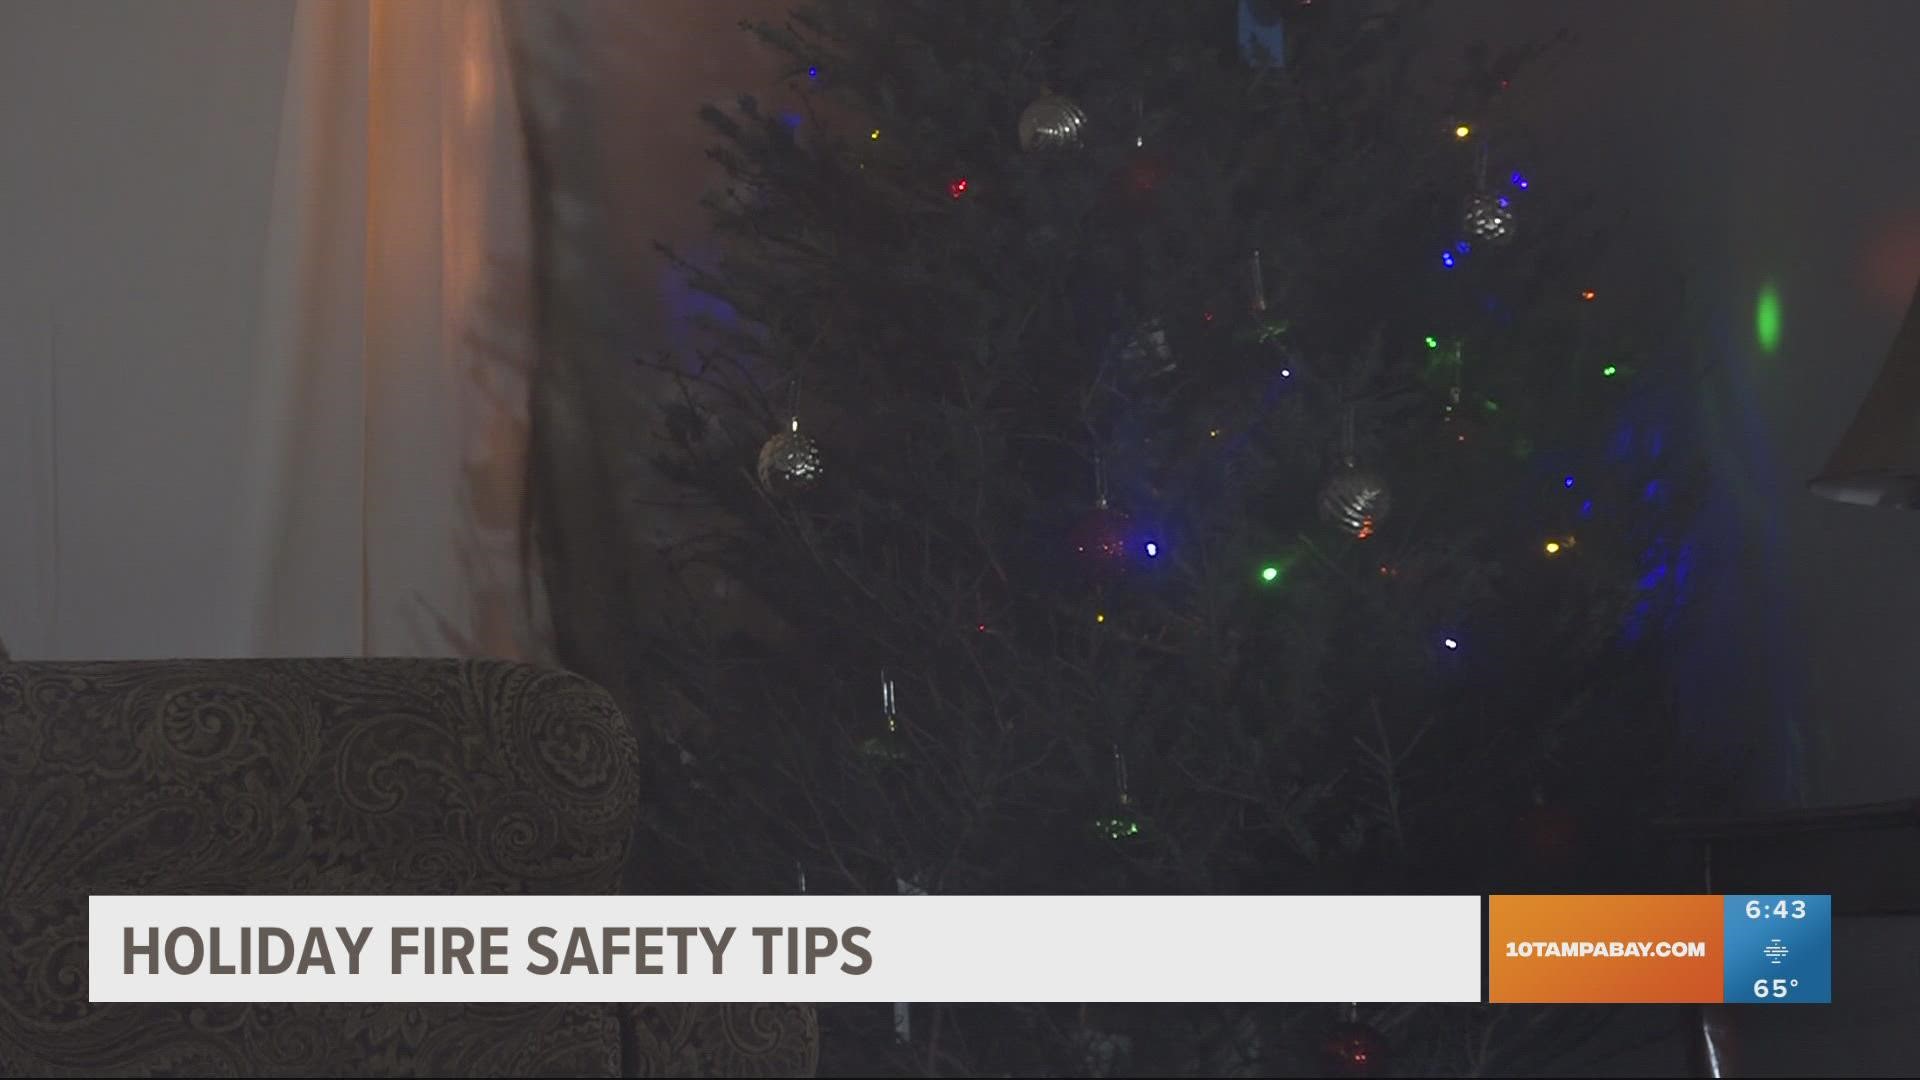 An unwatered and dry live Christmas tree poses a higher fire risk for your home than a well-watered one.